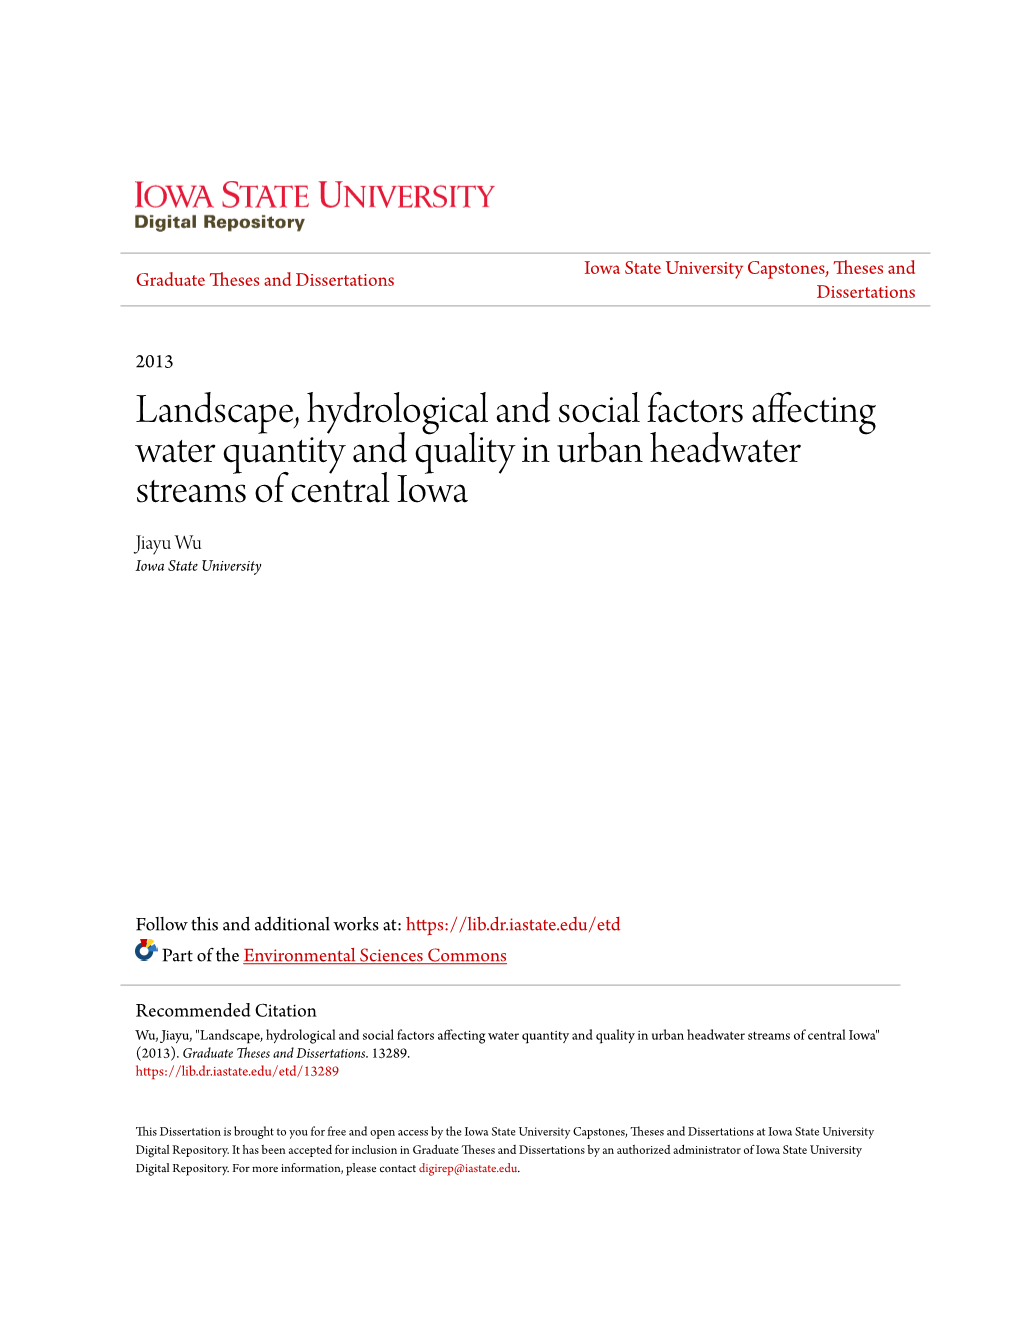 Landscape, Hydrological and Social Factors Affecting Water Quantity and Quality in Urban Headwater Streams of Central Iowa Jiayu Wu Iowa State University